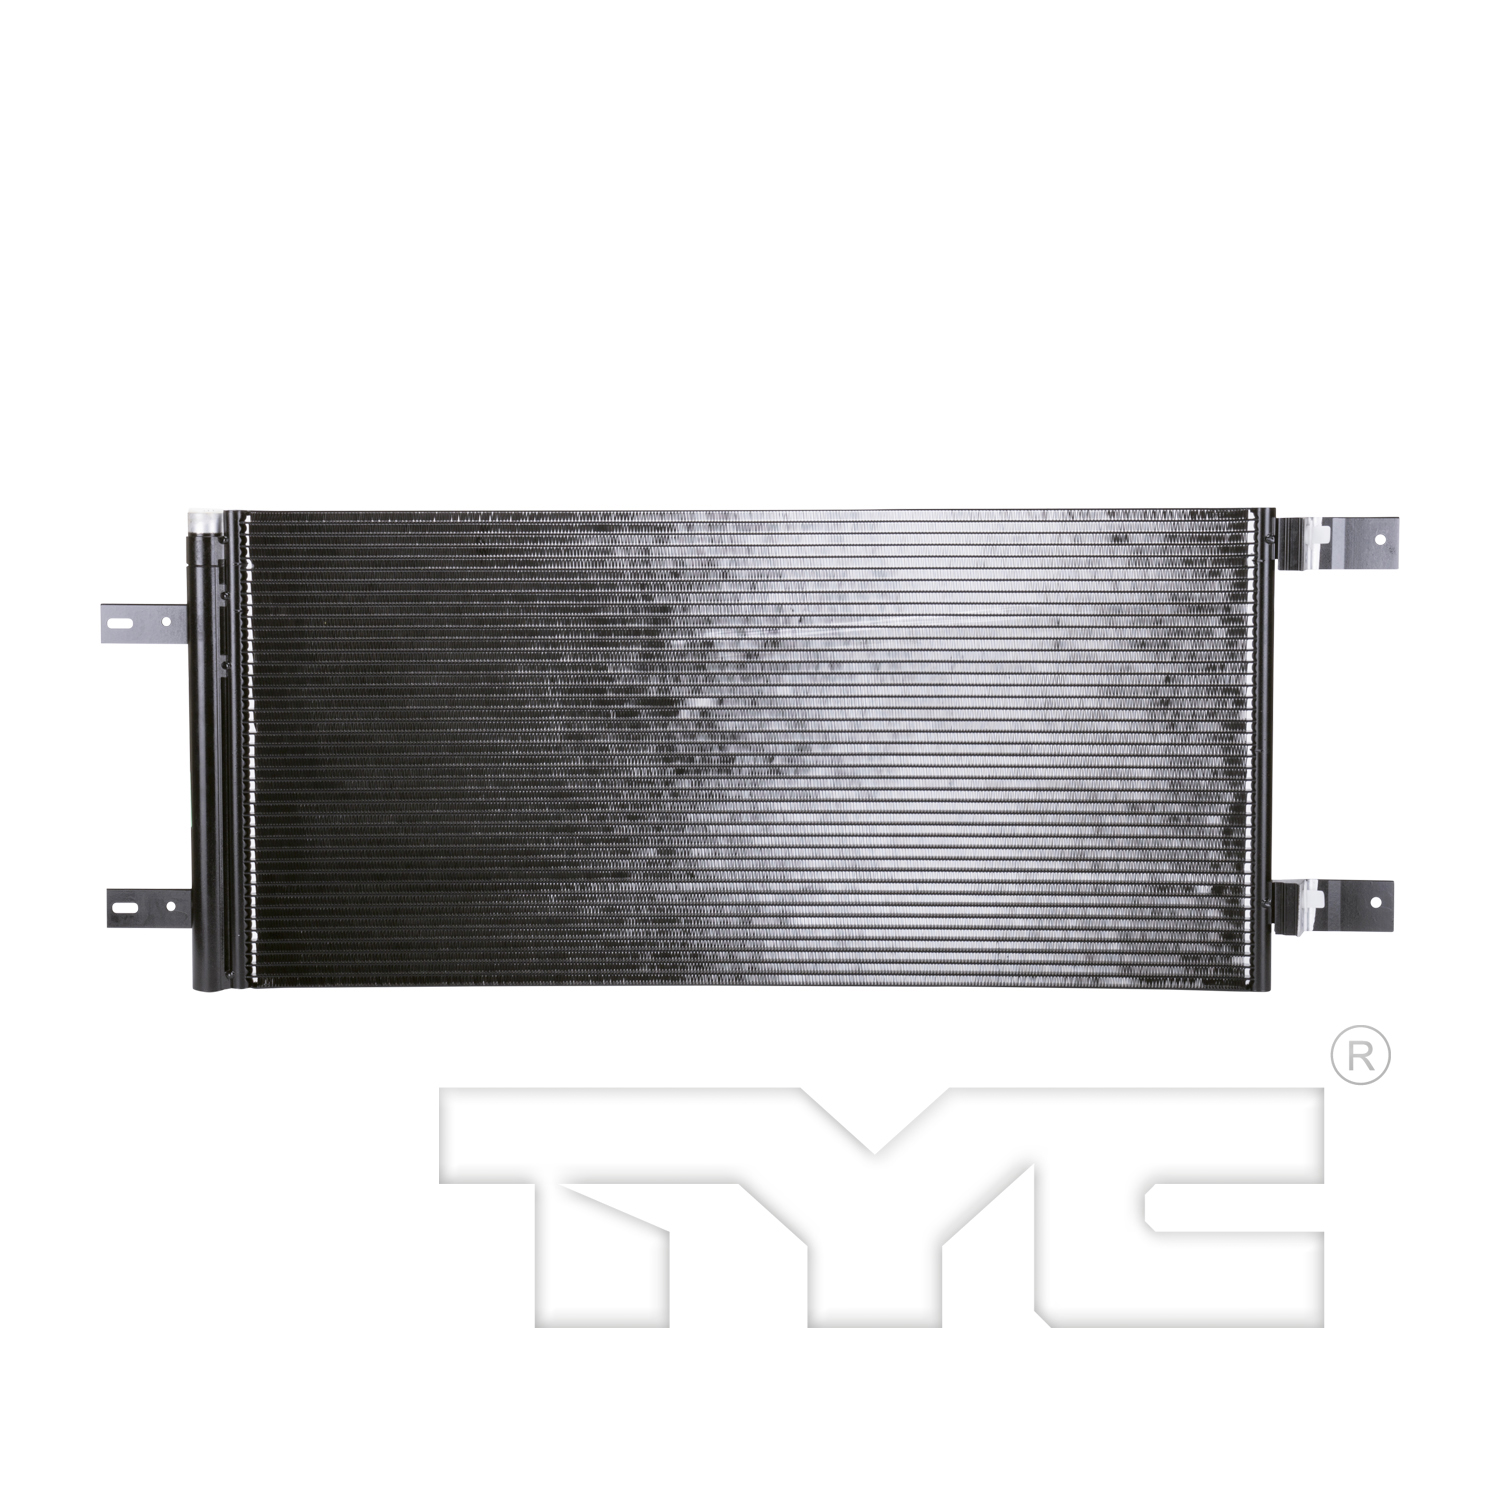 Aftermarket AC CONDENSERS for FORD - F-250 SUPER DUTY, F-250 SUPER DUTY,11-16,Air conditioning condenser